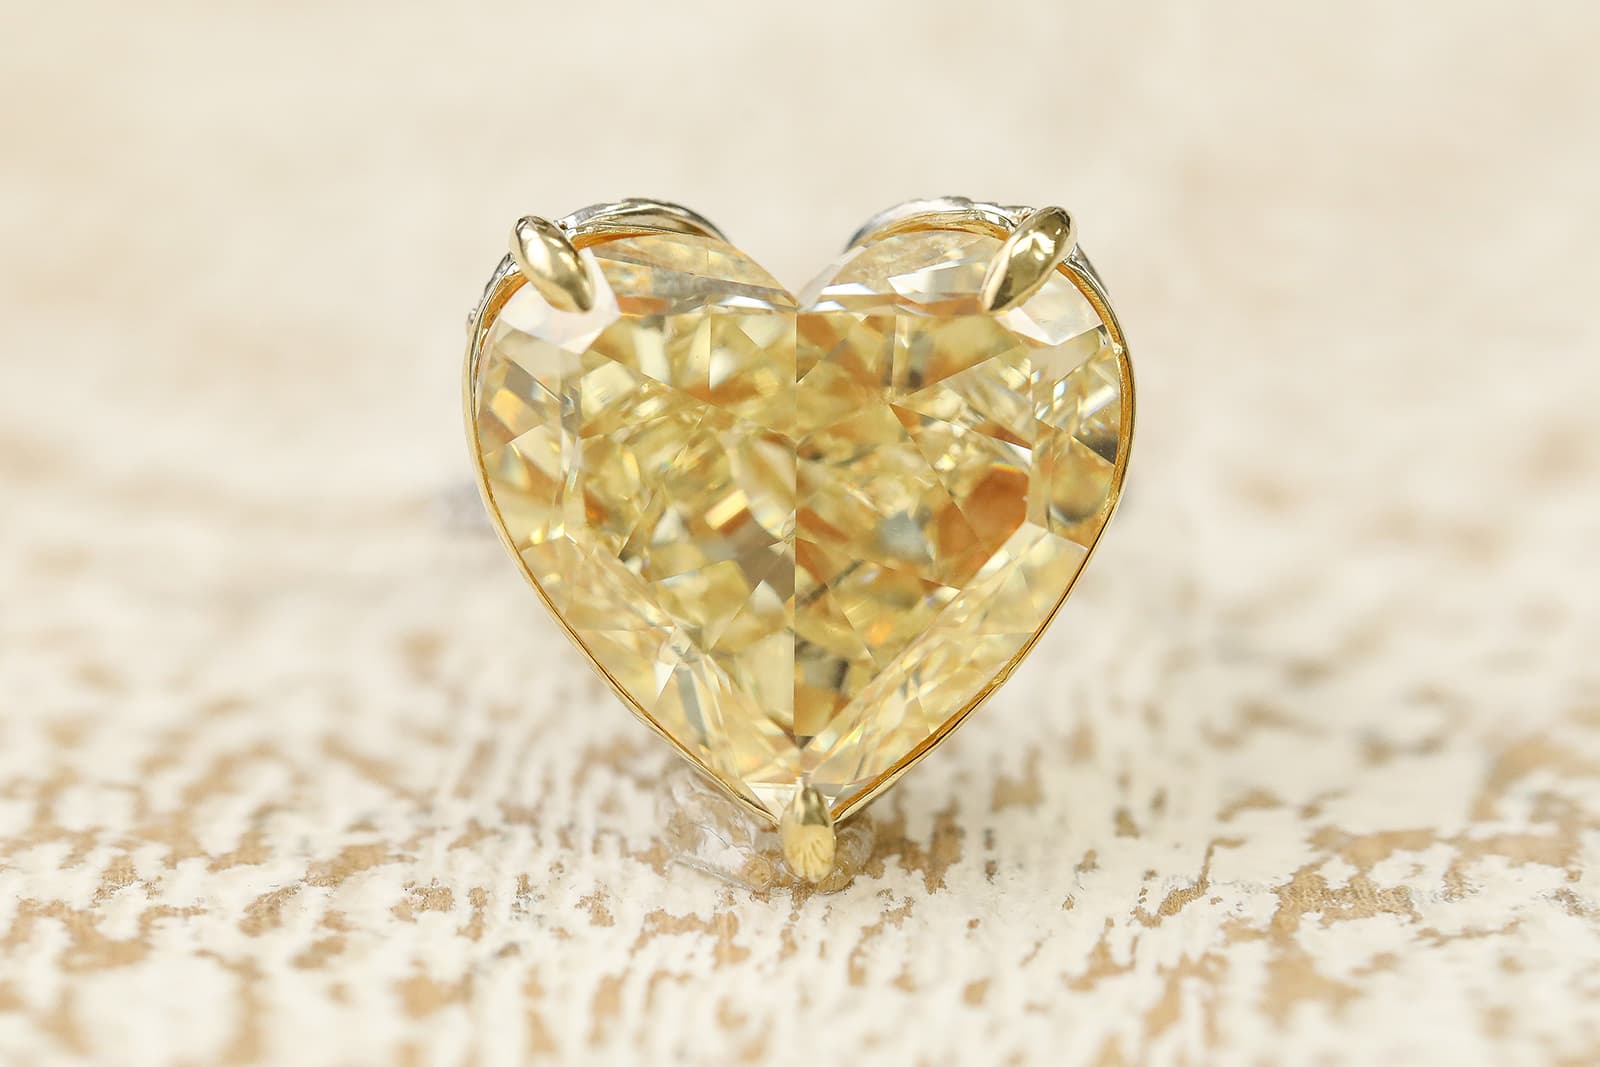 IceRock Diamonds fancy yellow heart-shaped diamond ring with a yellow gold setting (to enhance the diamond colour) and a white metal band 